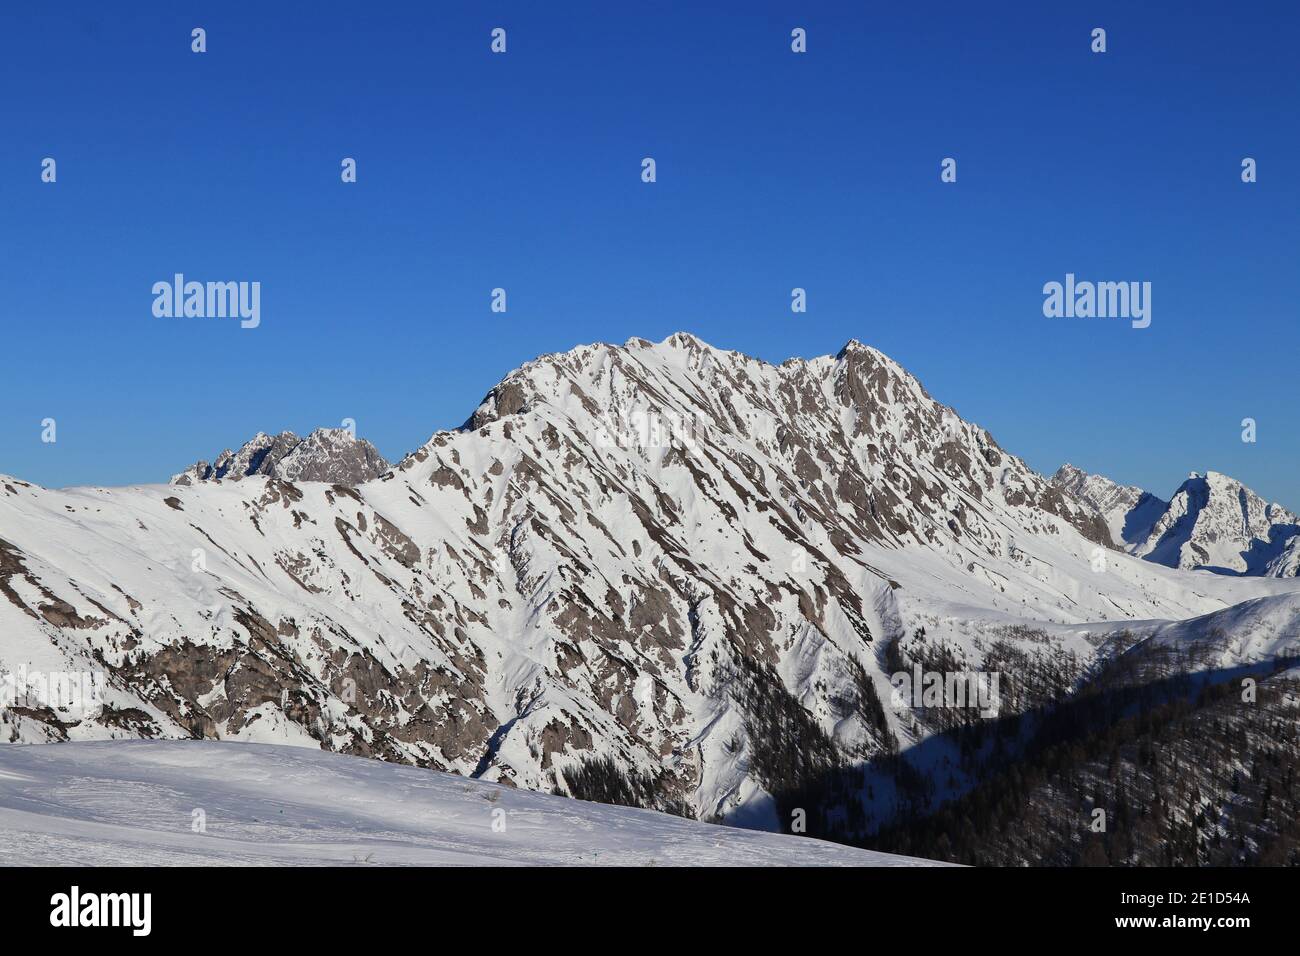 Magnificent views of the Tyrolean Alps in western Austria especially the rocky mountain Eggenkofel from the Obertilliach ski resort in the Lesachtal V Stock Photo